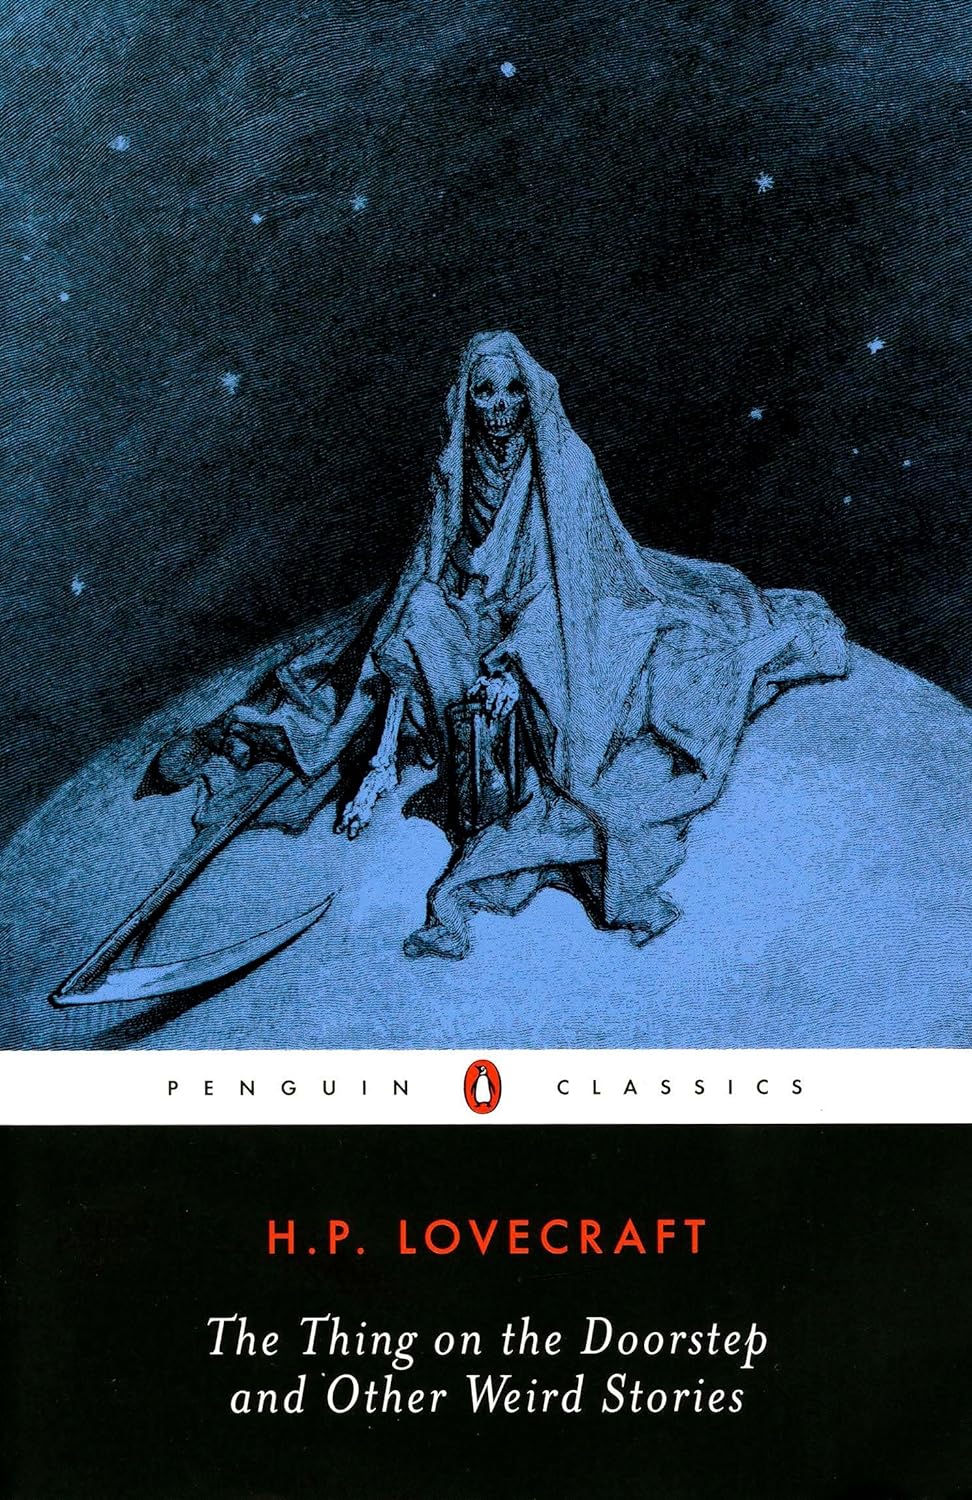 H. P. Lovecraft: The thing on the doorstep and other weird stories (2001, Penguin Books)